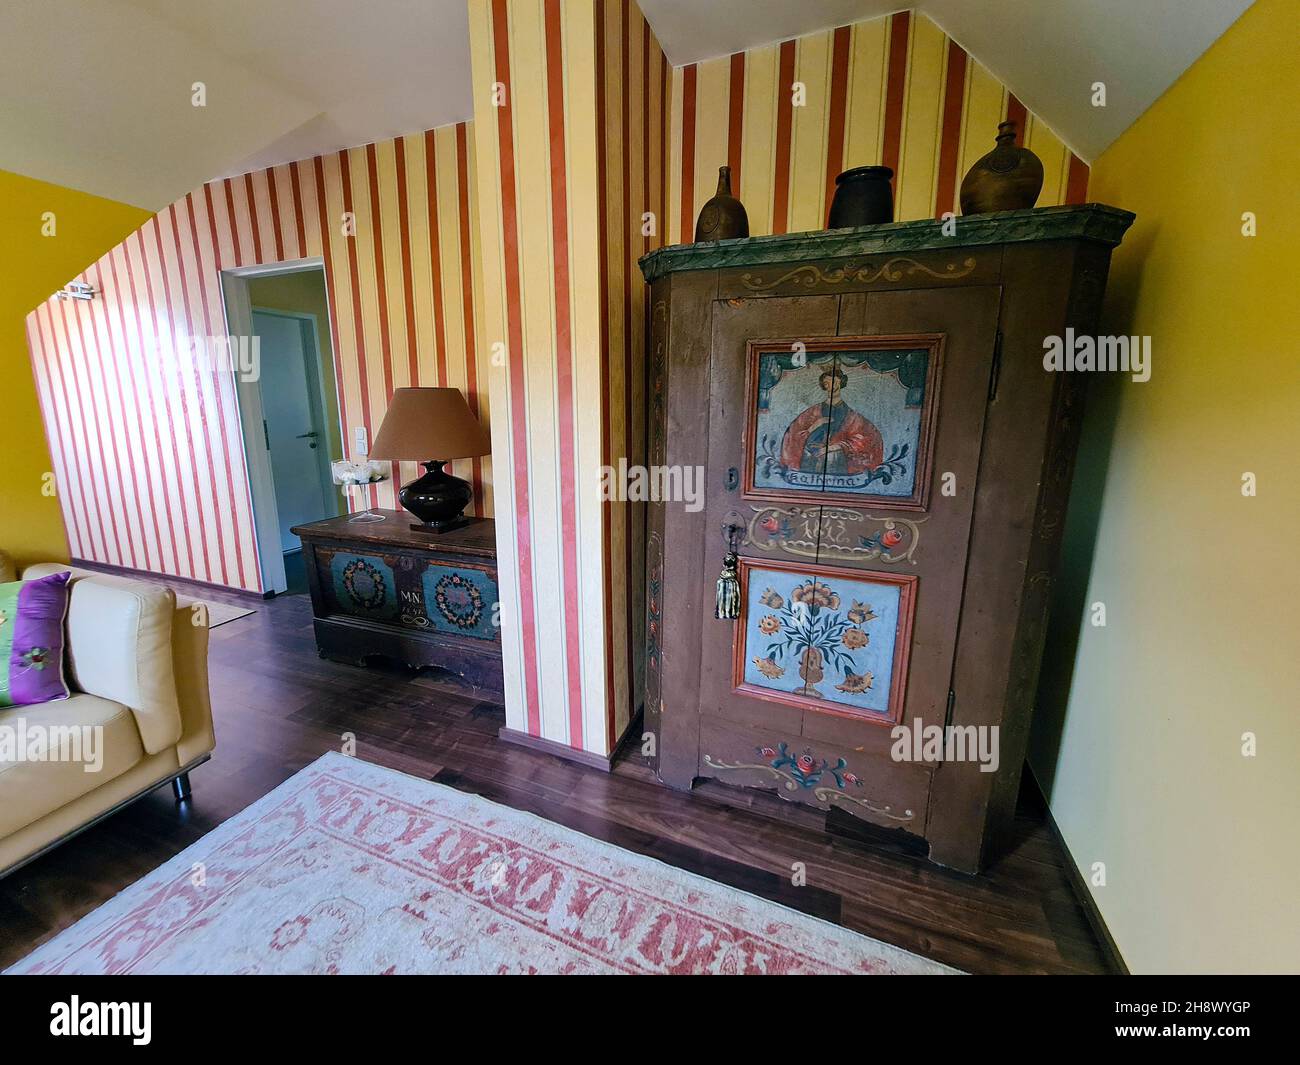 Austria, modern room combined with old painted furniture, wardrobe and chest of drawers from the 19th century Stock Photo